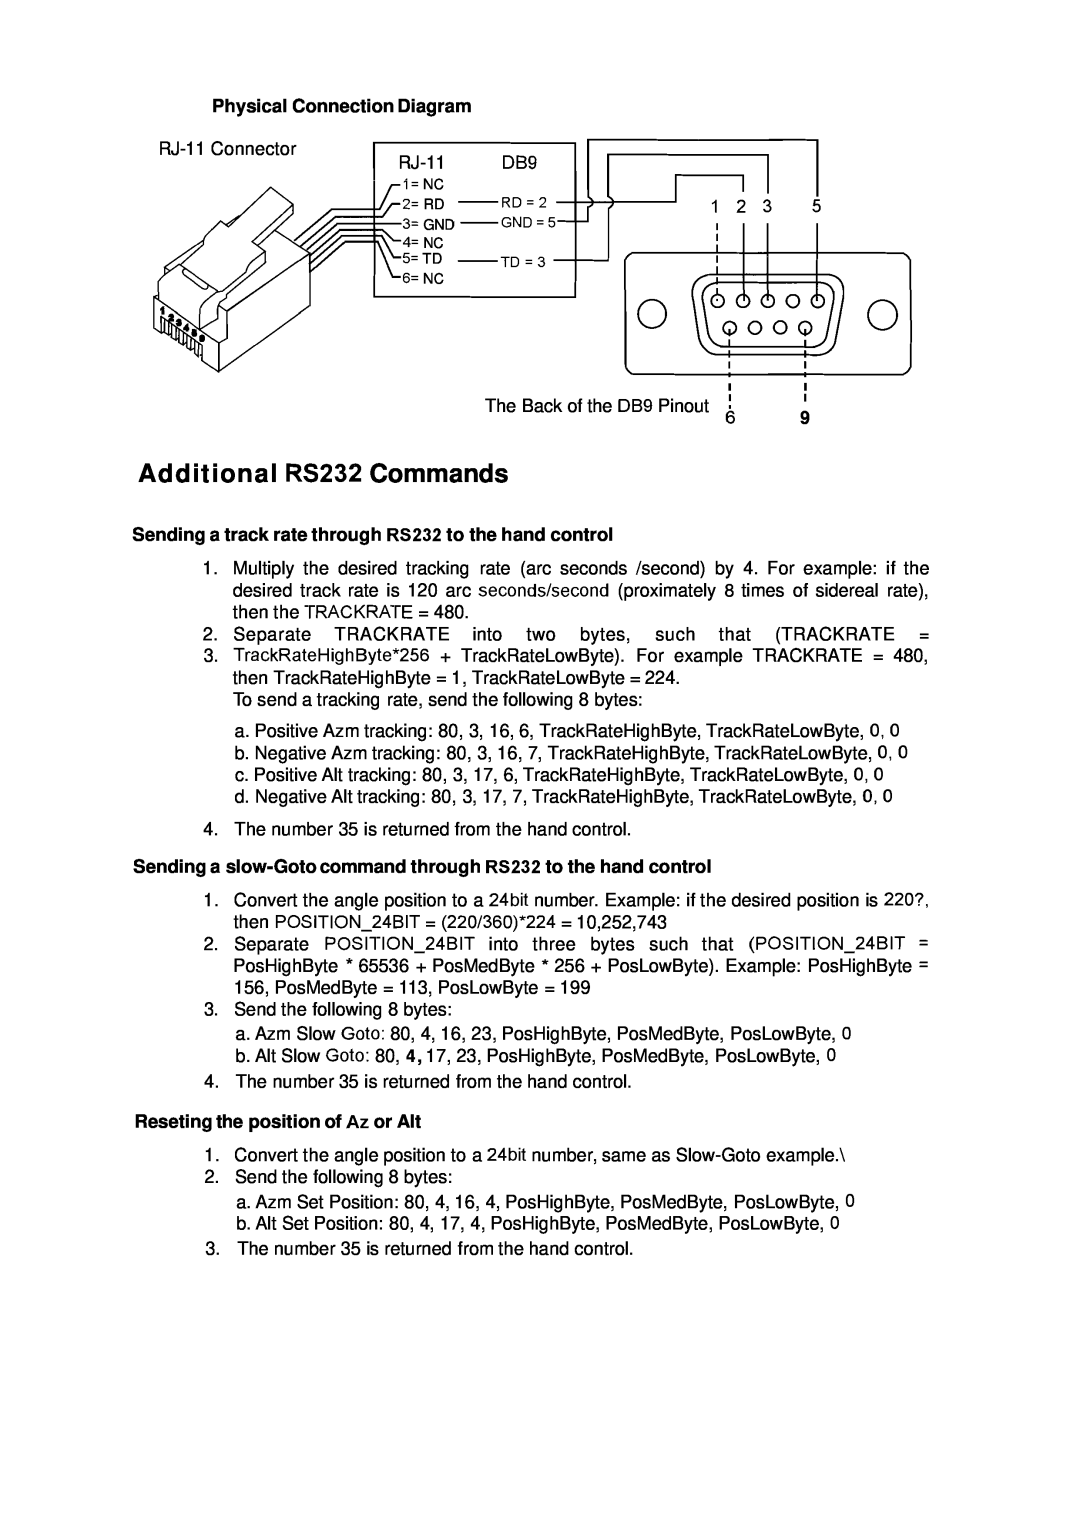 Nexstar SynScan Additional RS232 Commands, Physical Connection Diagram, Reseting the position of Az or Alt 